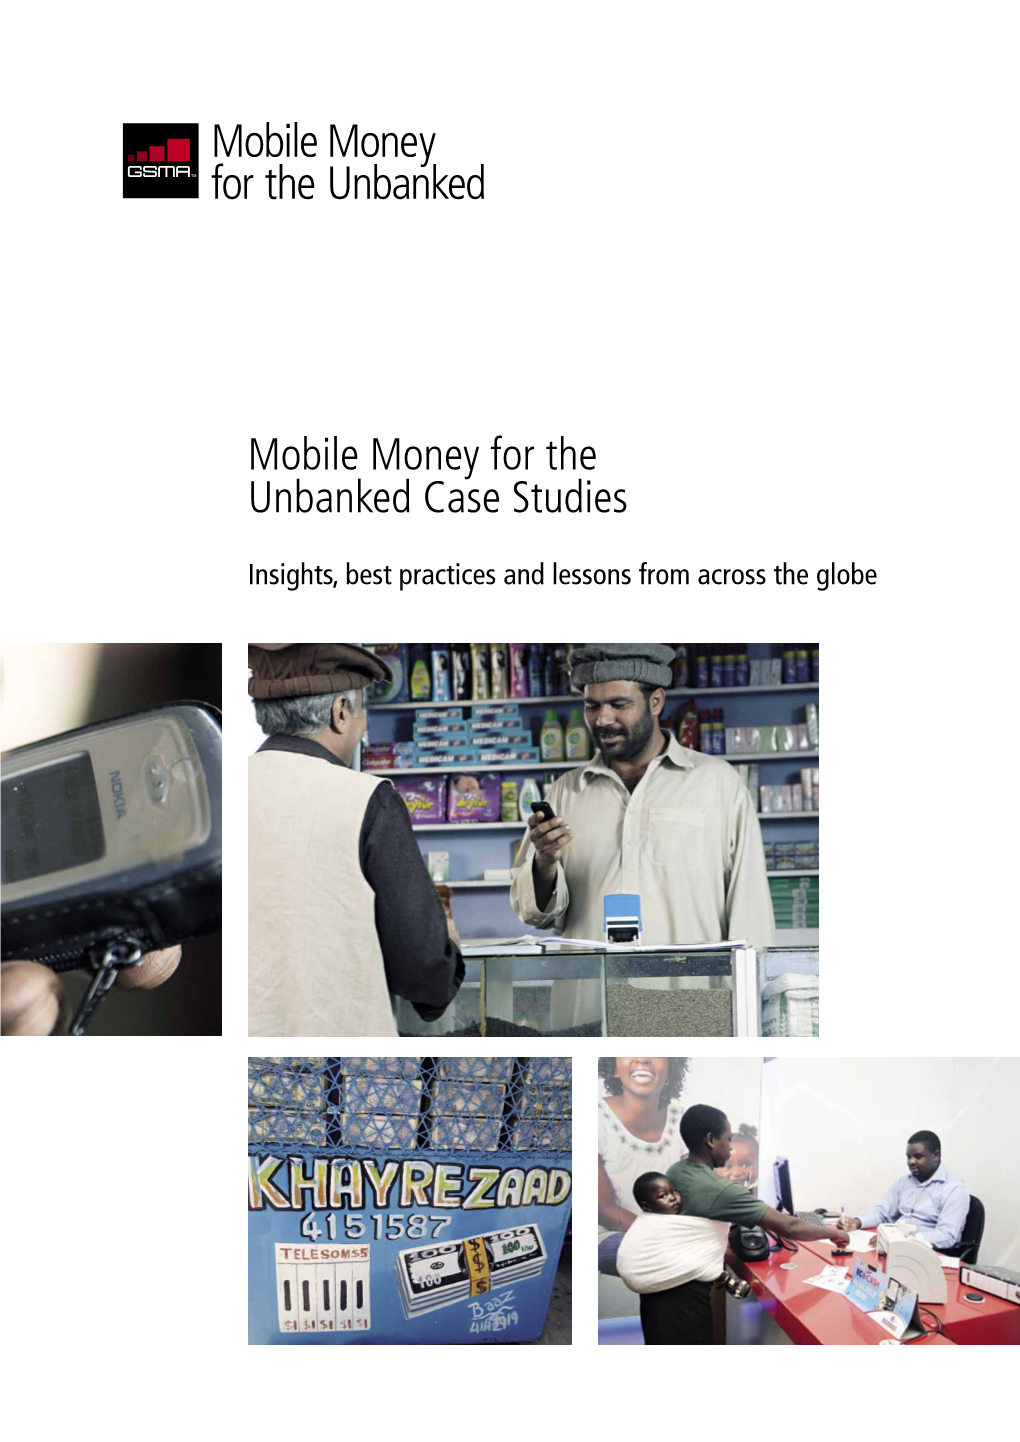 Mobile Money for the Unbanked Case Studies